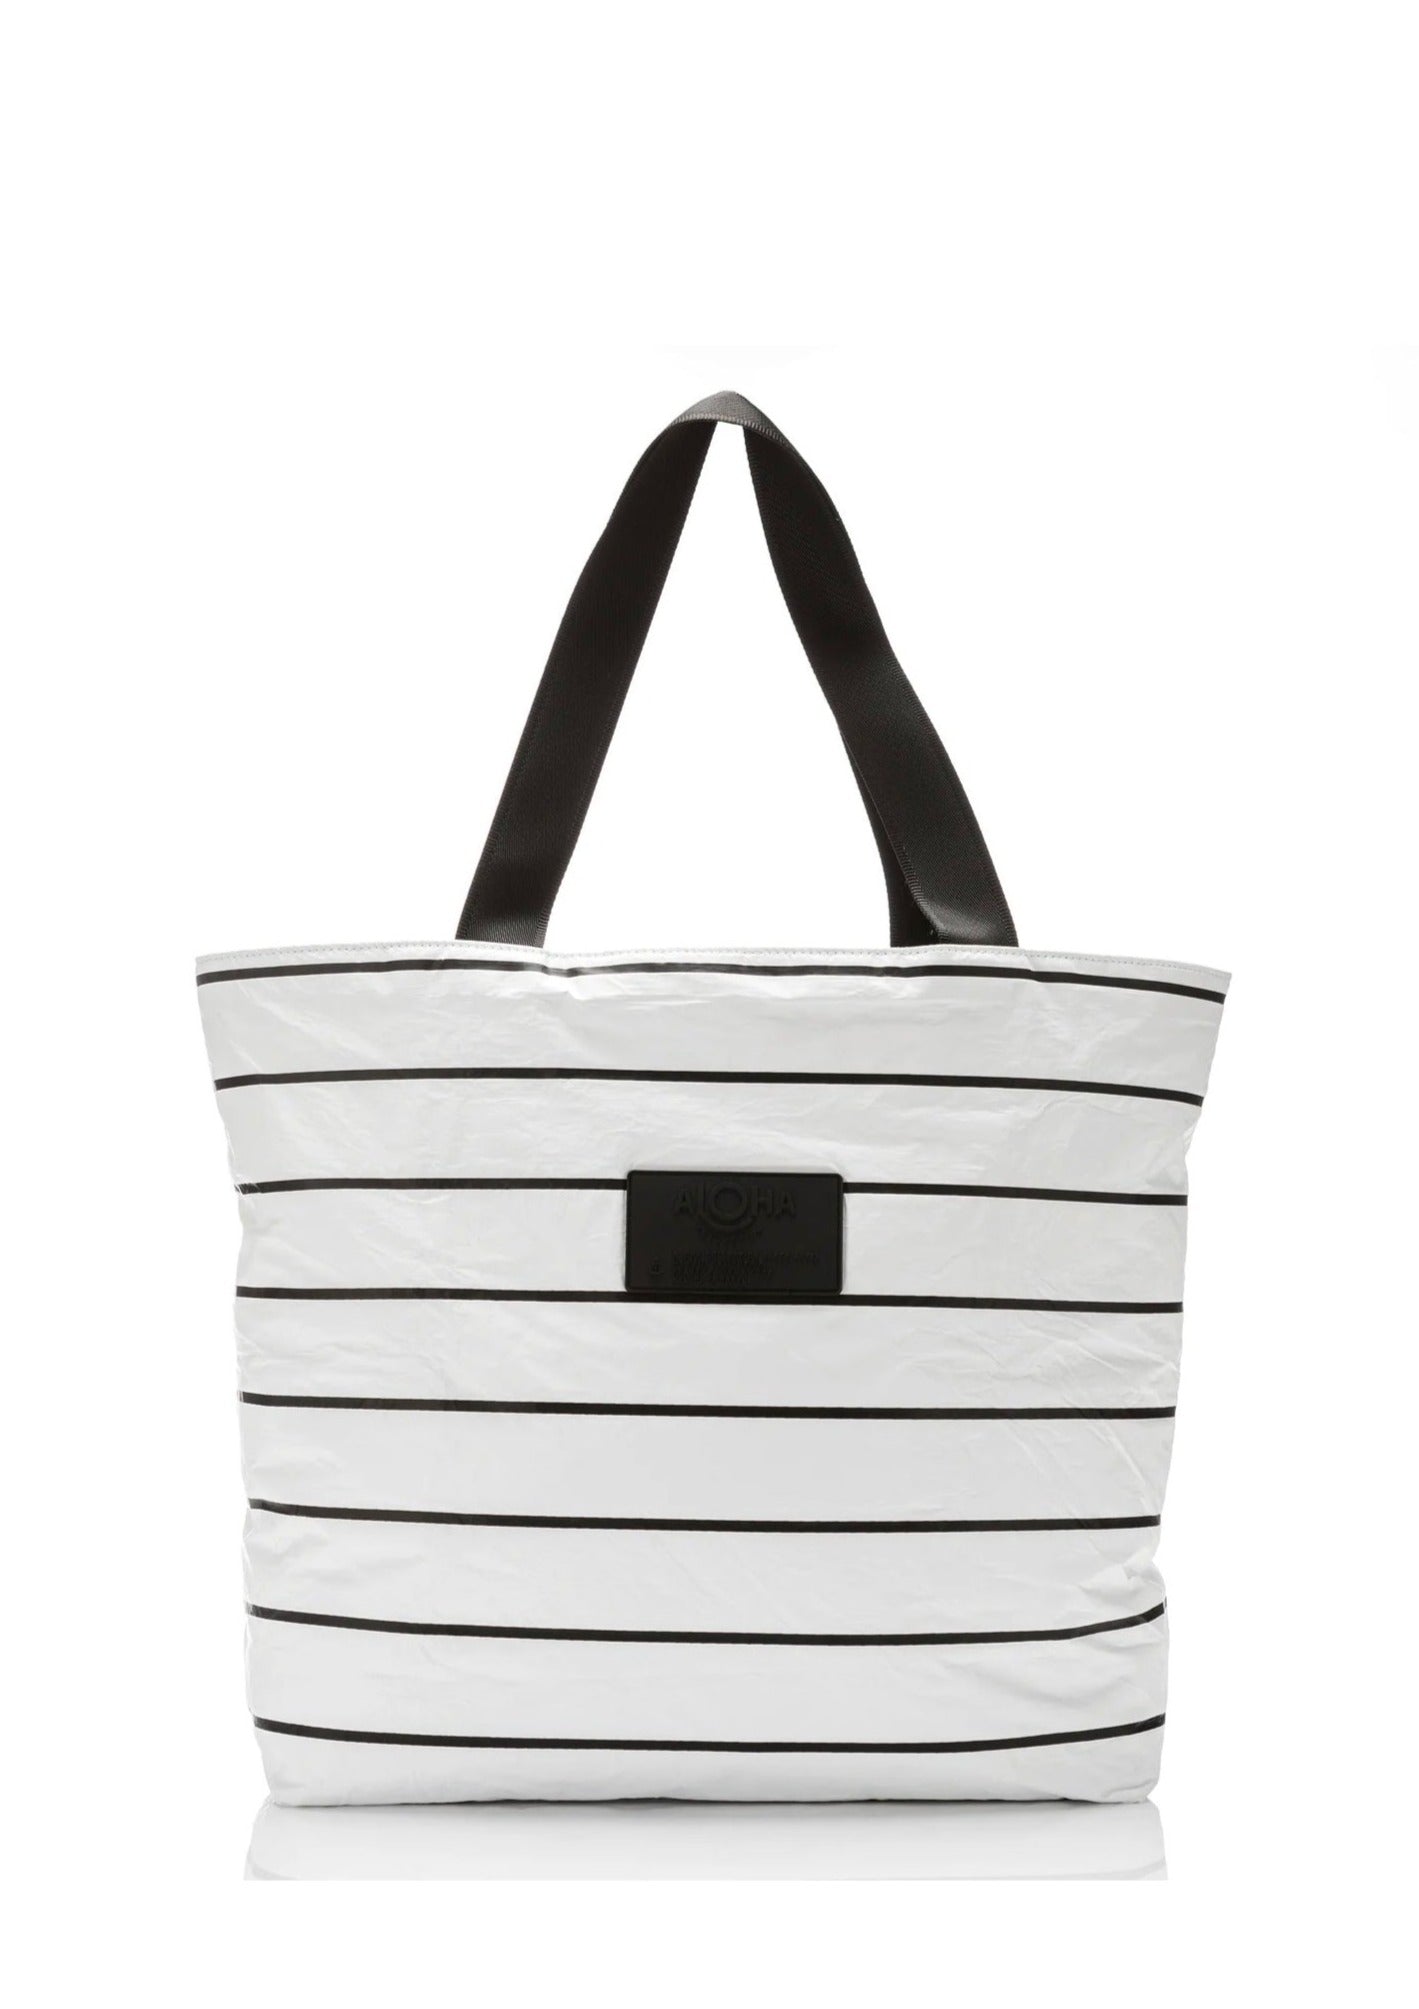 Aloha Day Tripper Tote - Pinstripe Black/White Our classic and best-selling Pinstripes are ready for take off with our Day Tripper Tote! These timeless stripes pair perfectly with any adventure!